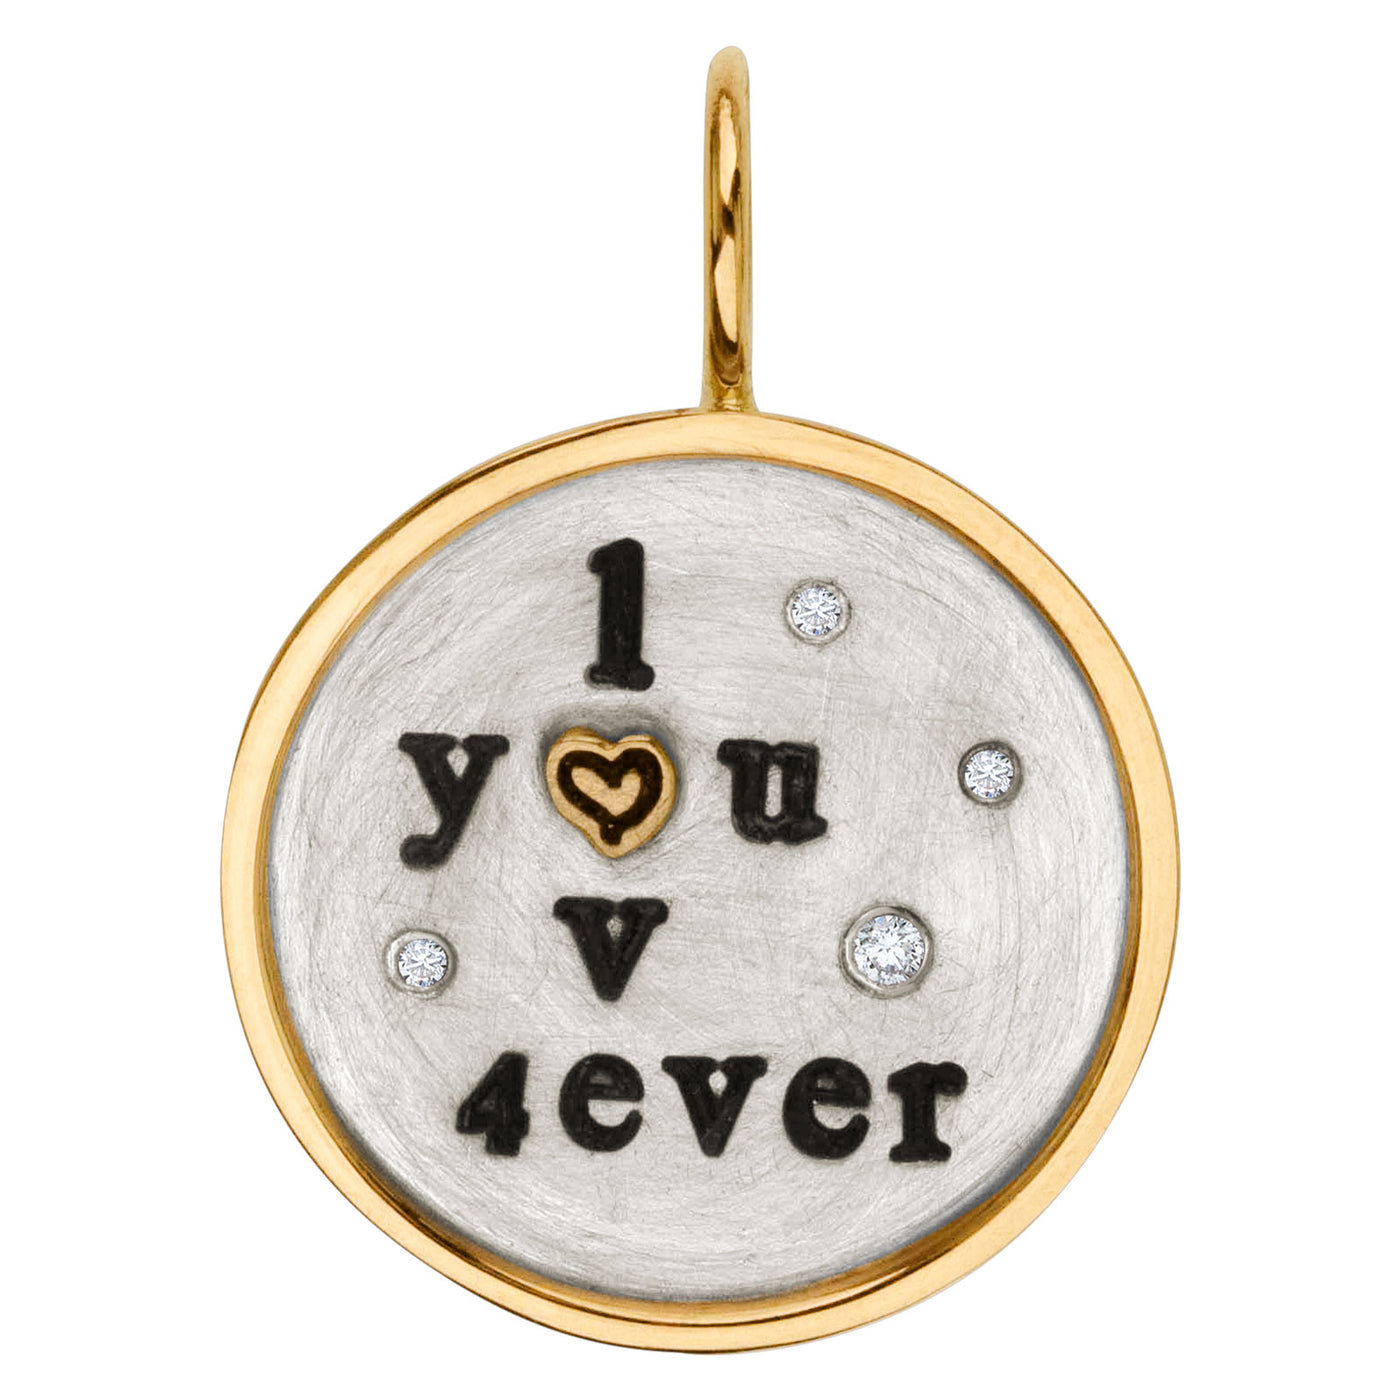 Love You 4Ever Round Charm